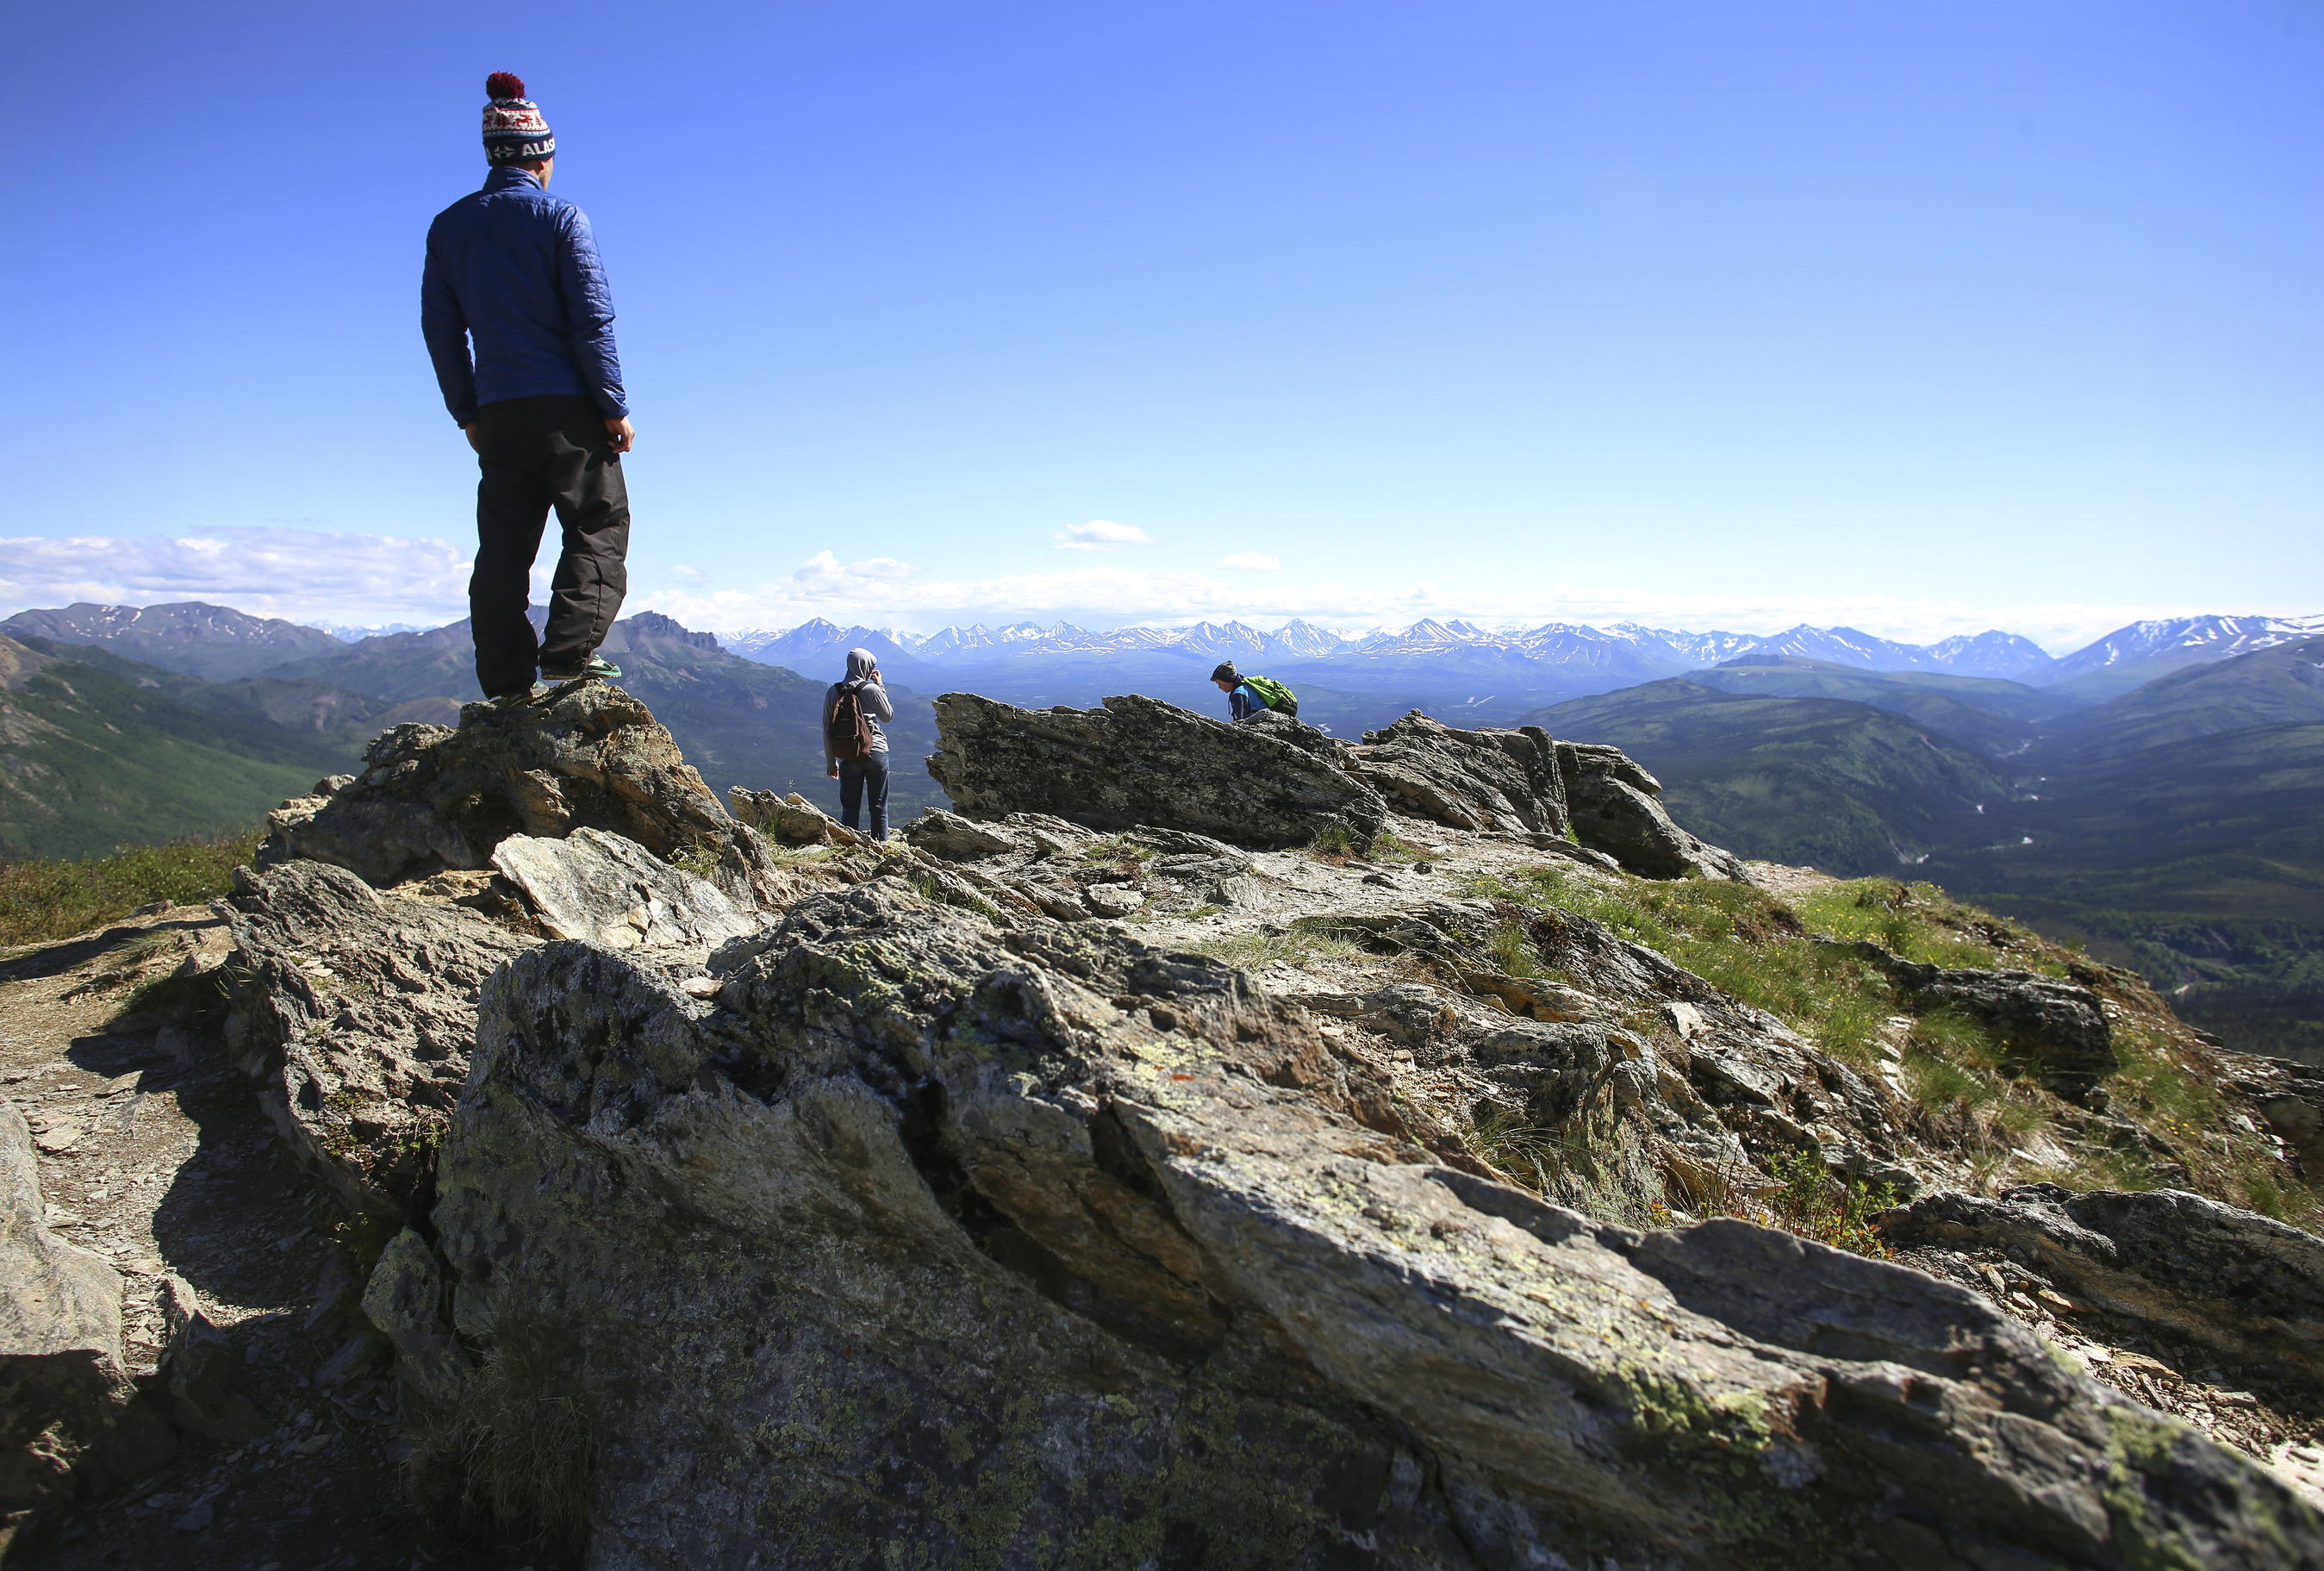 Visitors at the overlook on Mount Healy Trail and Denali National Park.